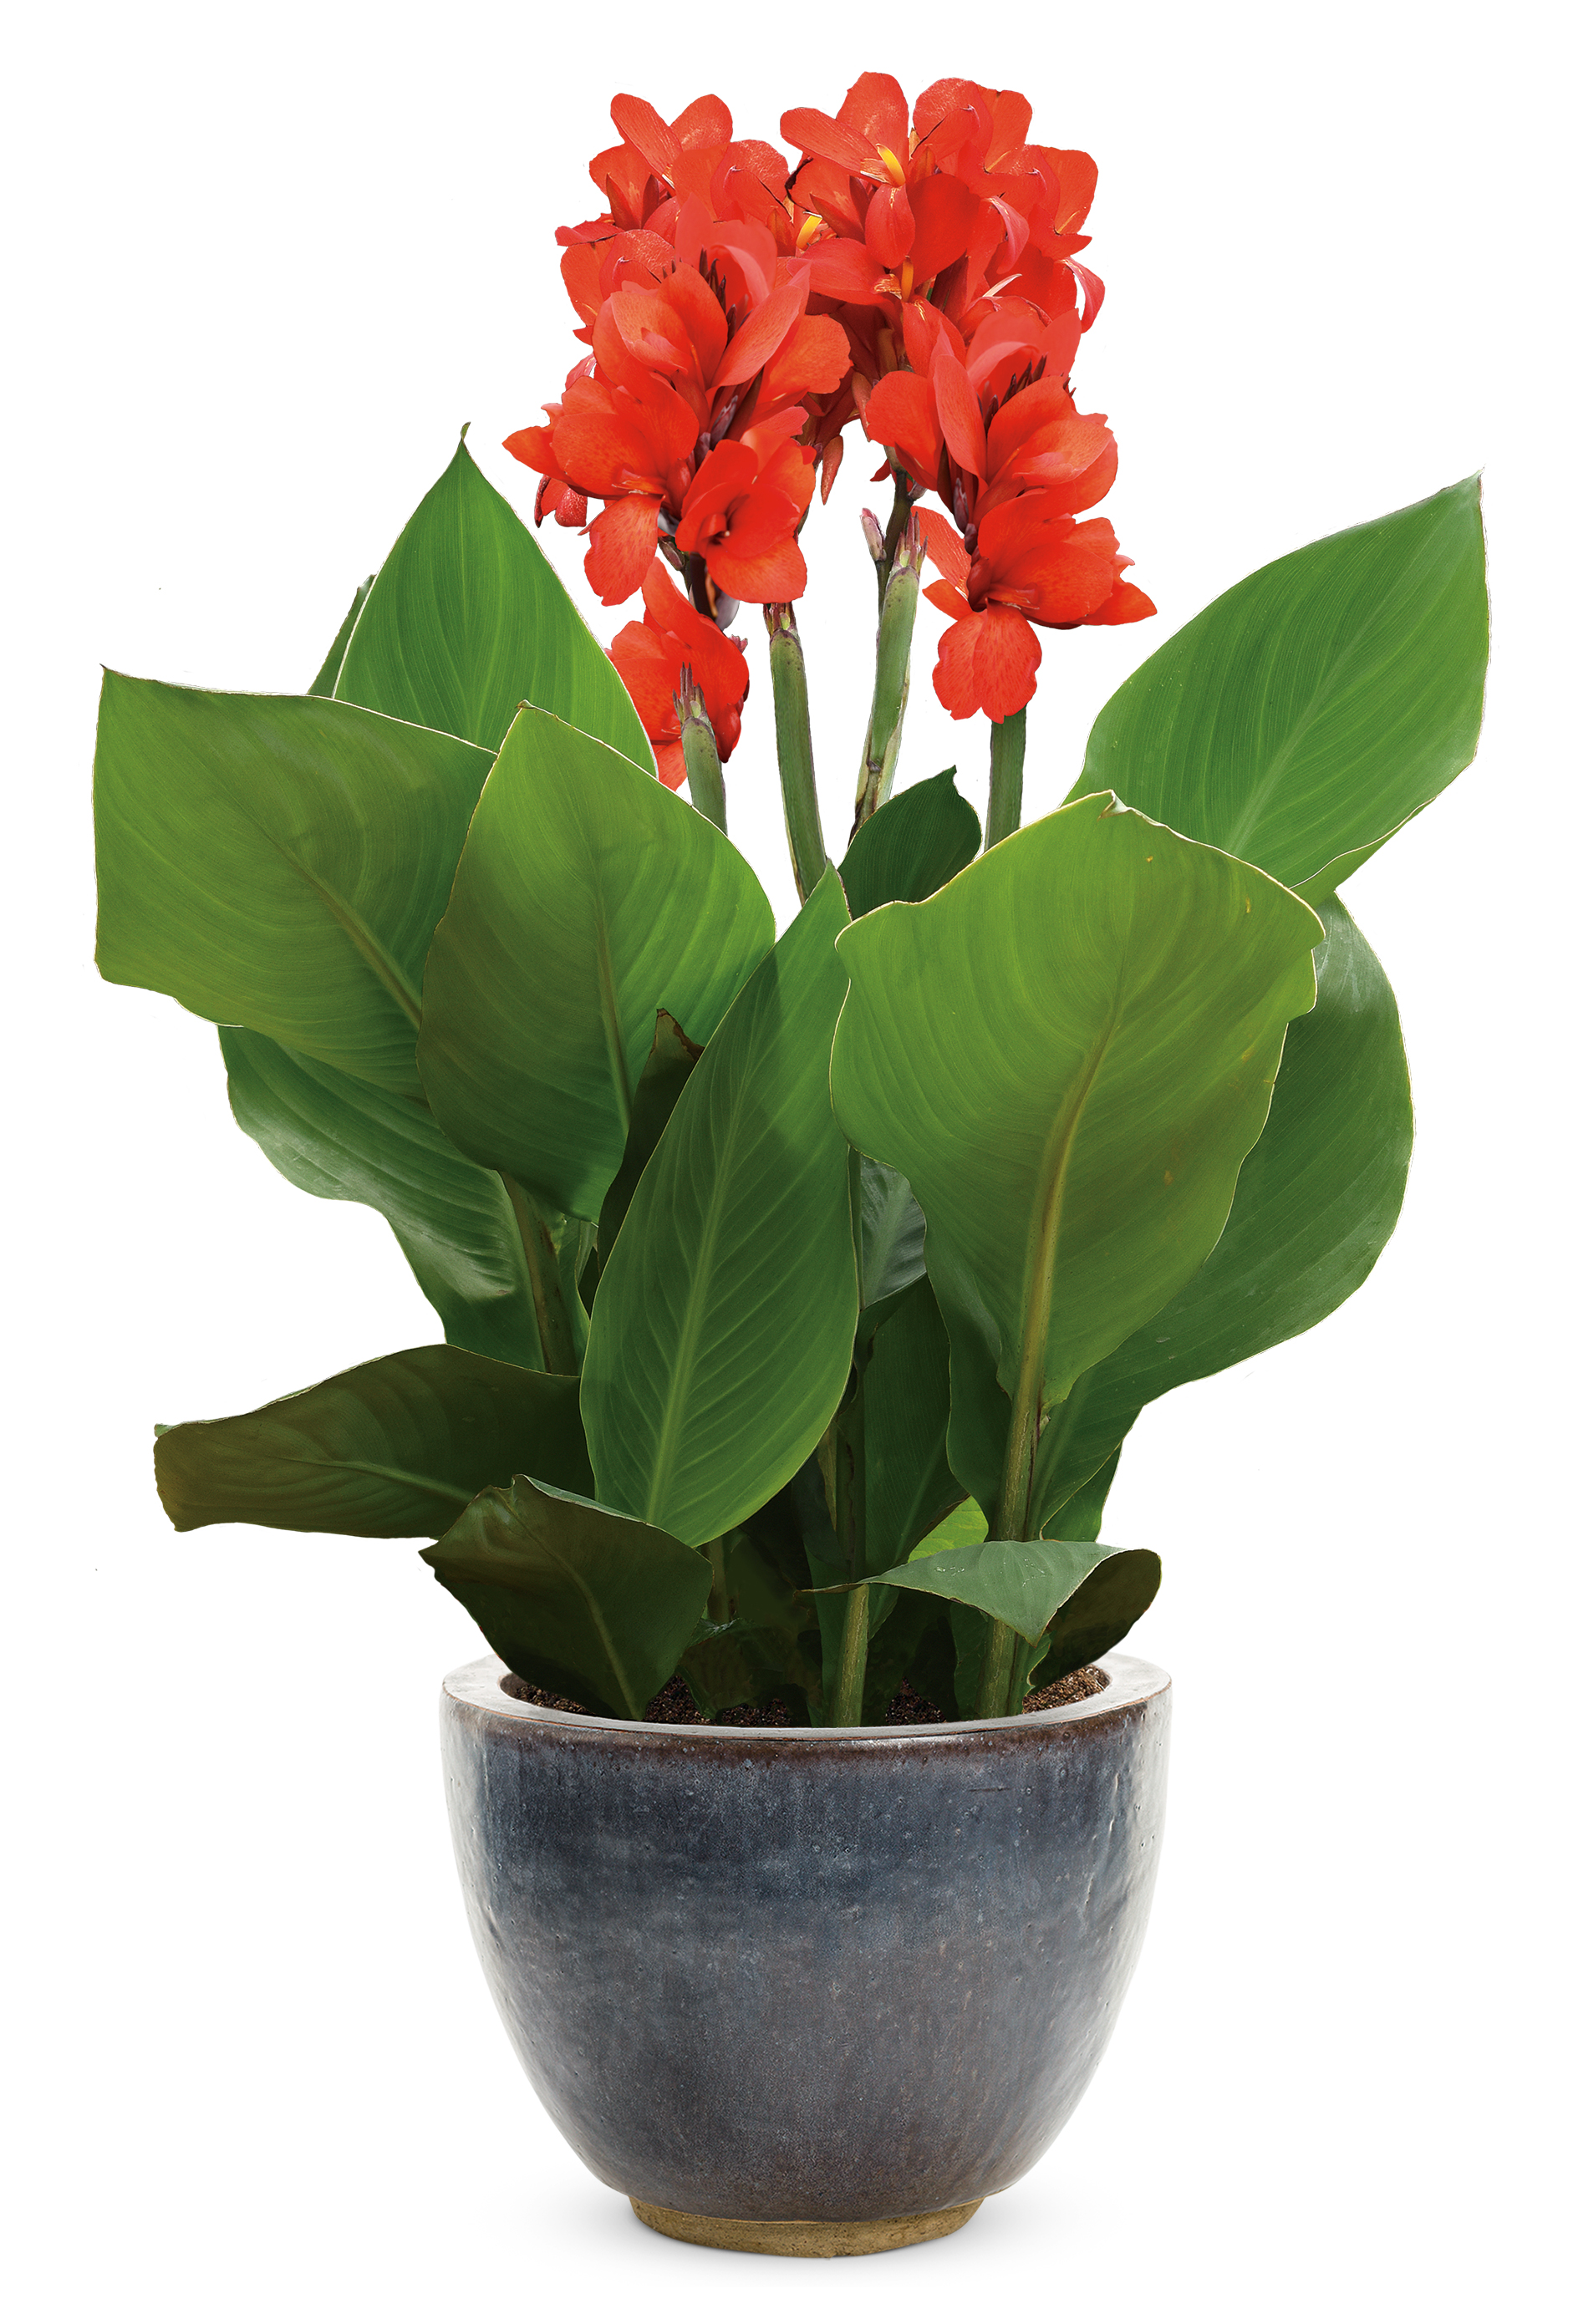 Toucan® Scarlet - Canna Lily - Canna generalis